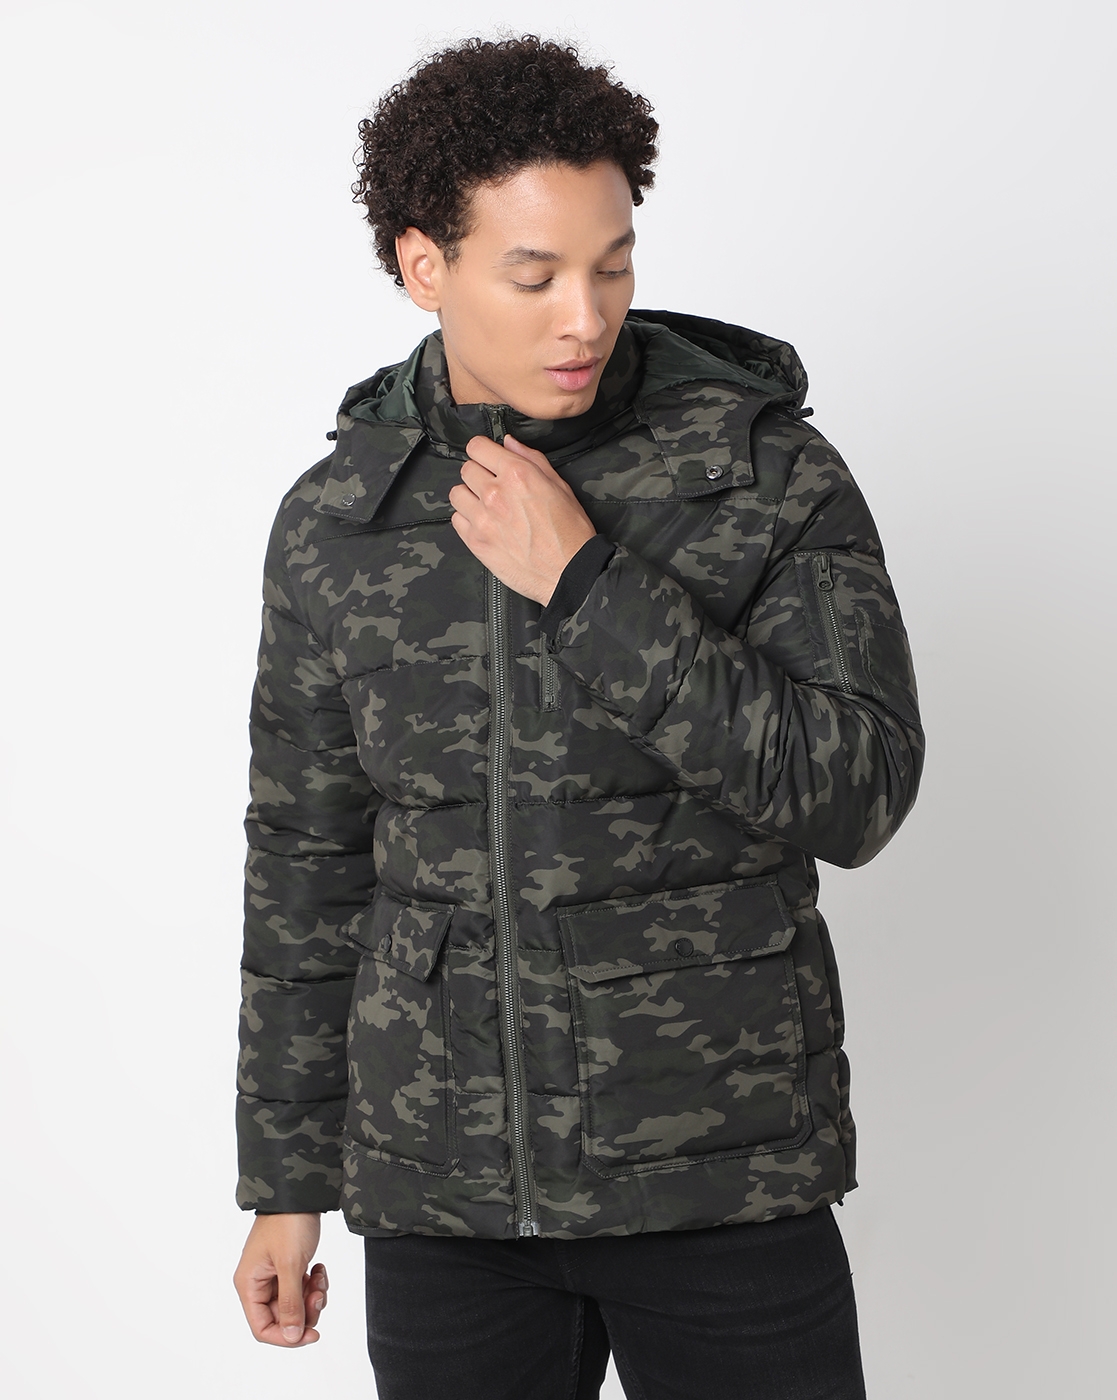 GAS | Regular Fit Full Sleeve Hooded Neck Camouflage Polyester Jacket